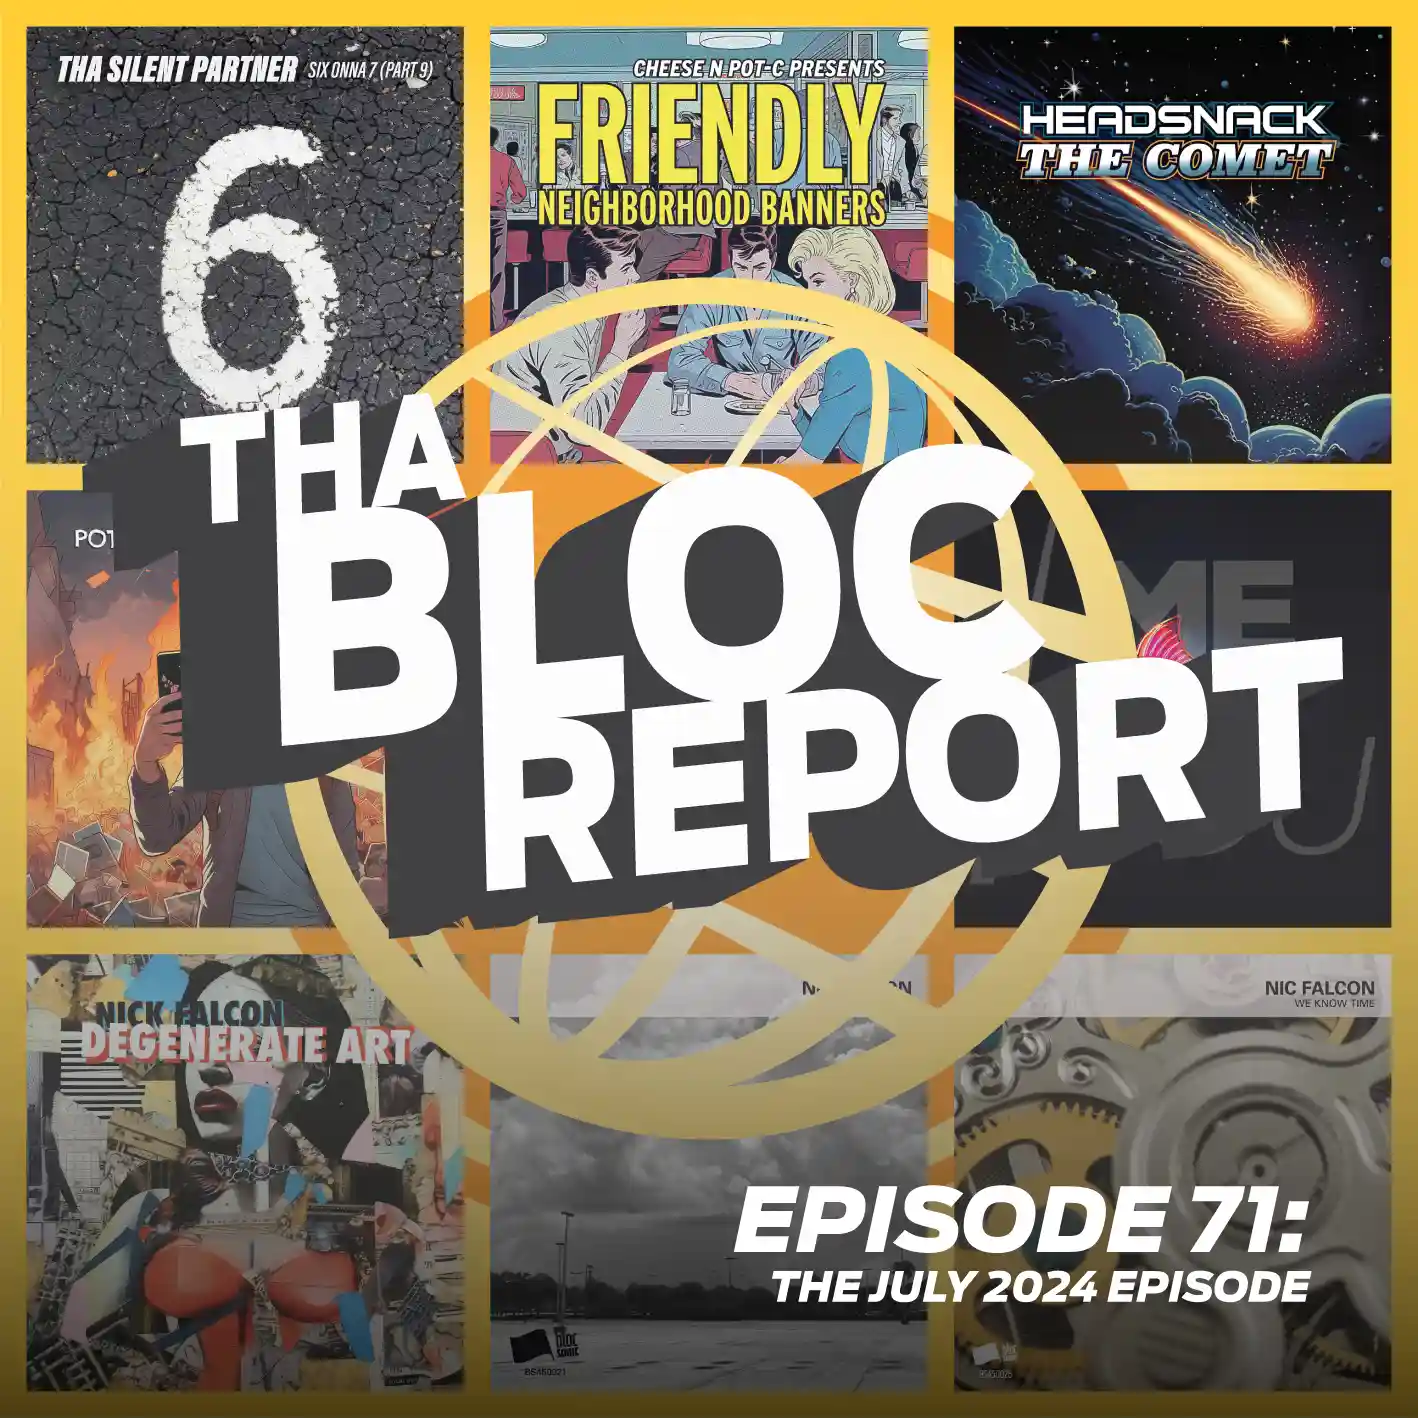 Cover image for “Tha Bloc Report Episode 71: The July 2024 Episode” hosted by Donnie Ozone